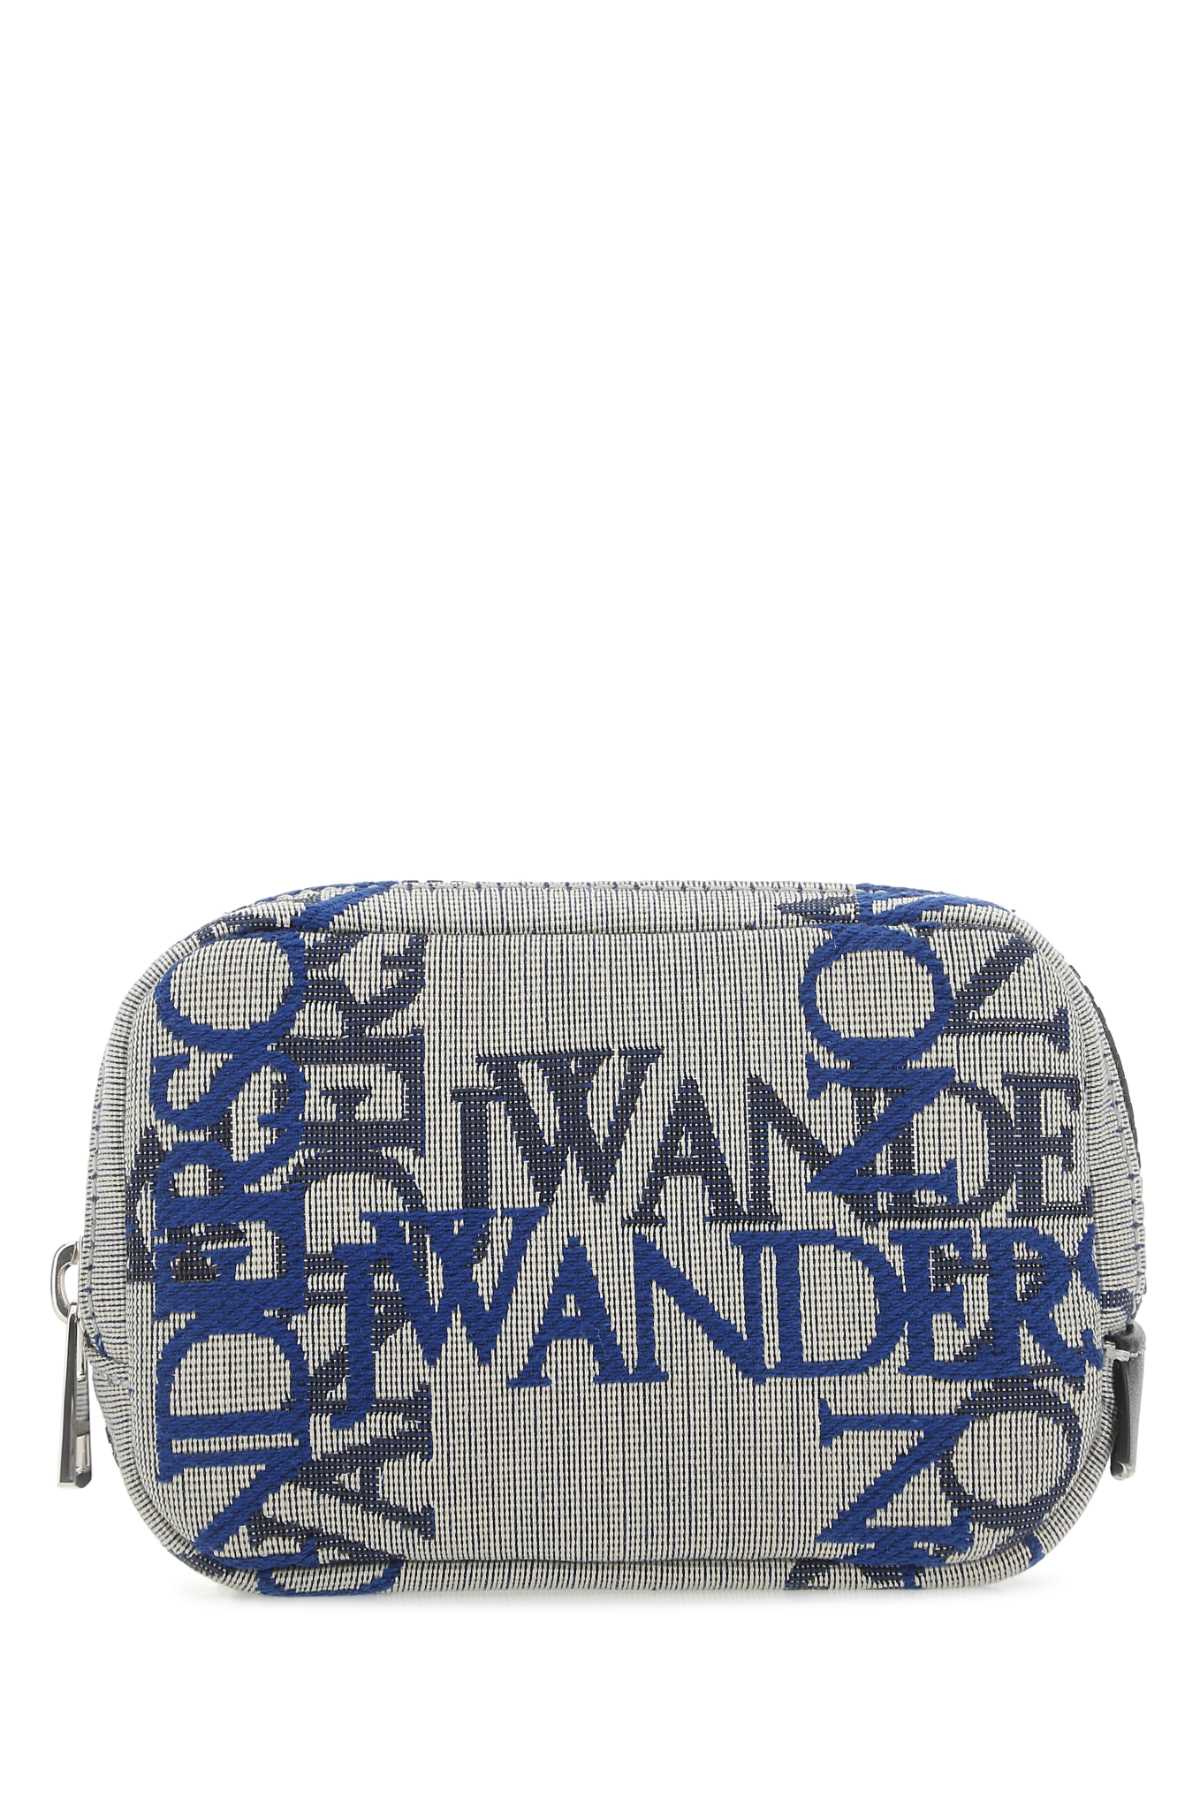 J.W. Anderson Embroidered Fabric Beauty Case